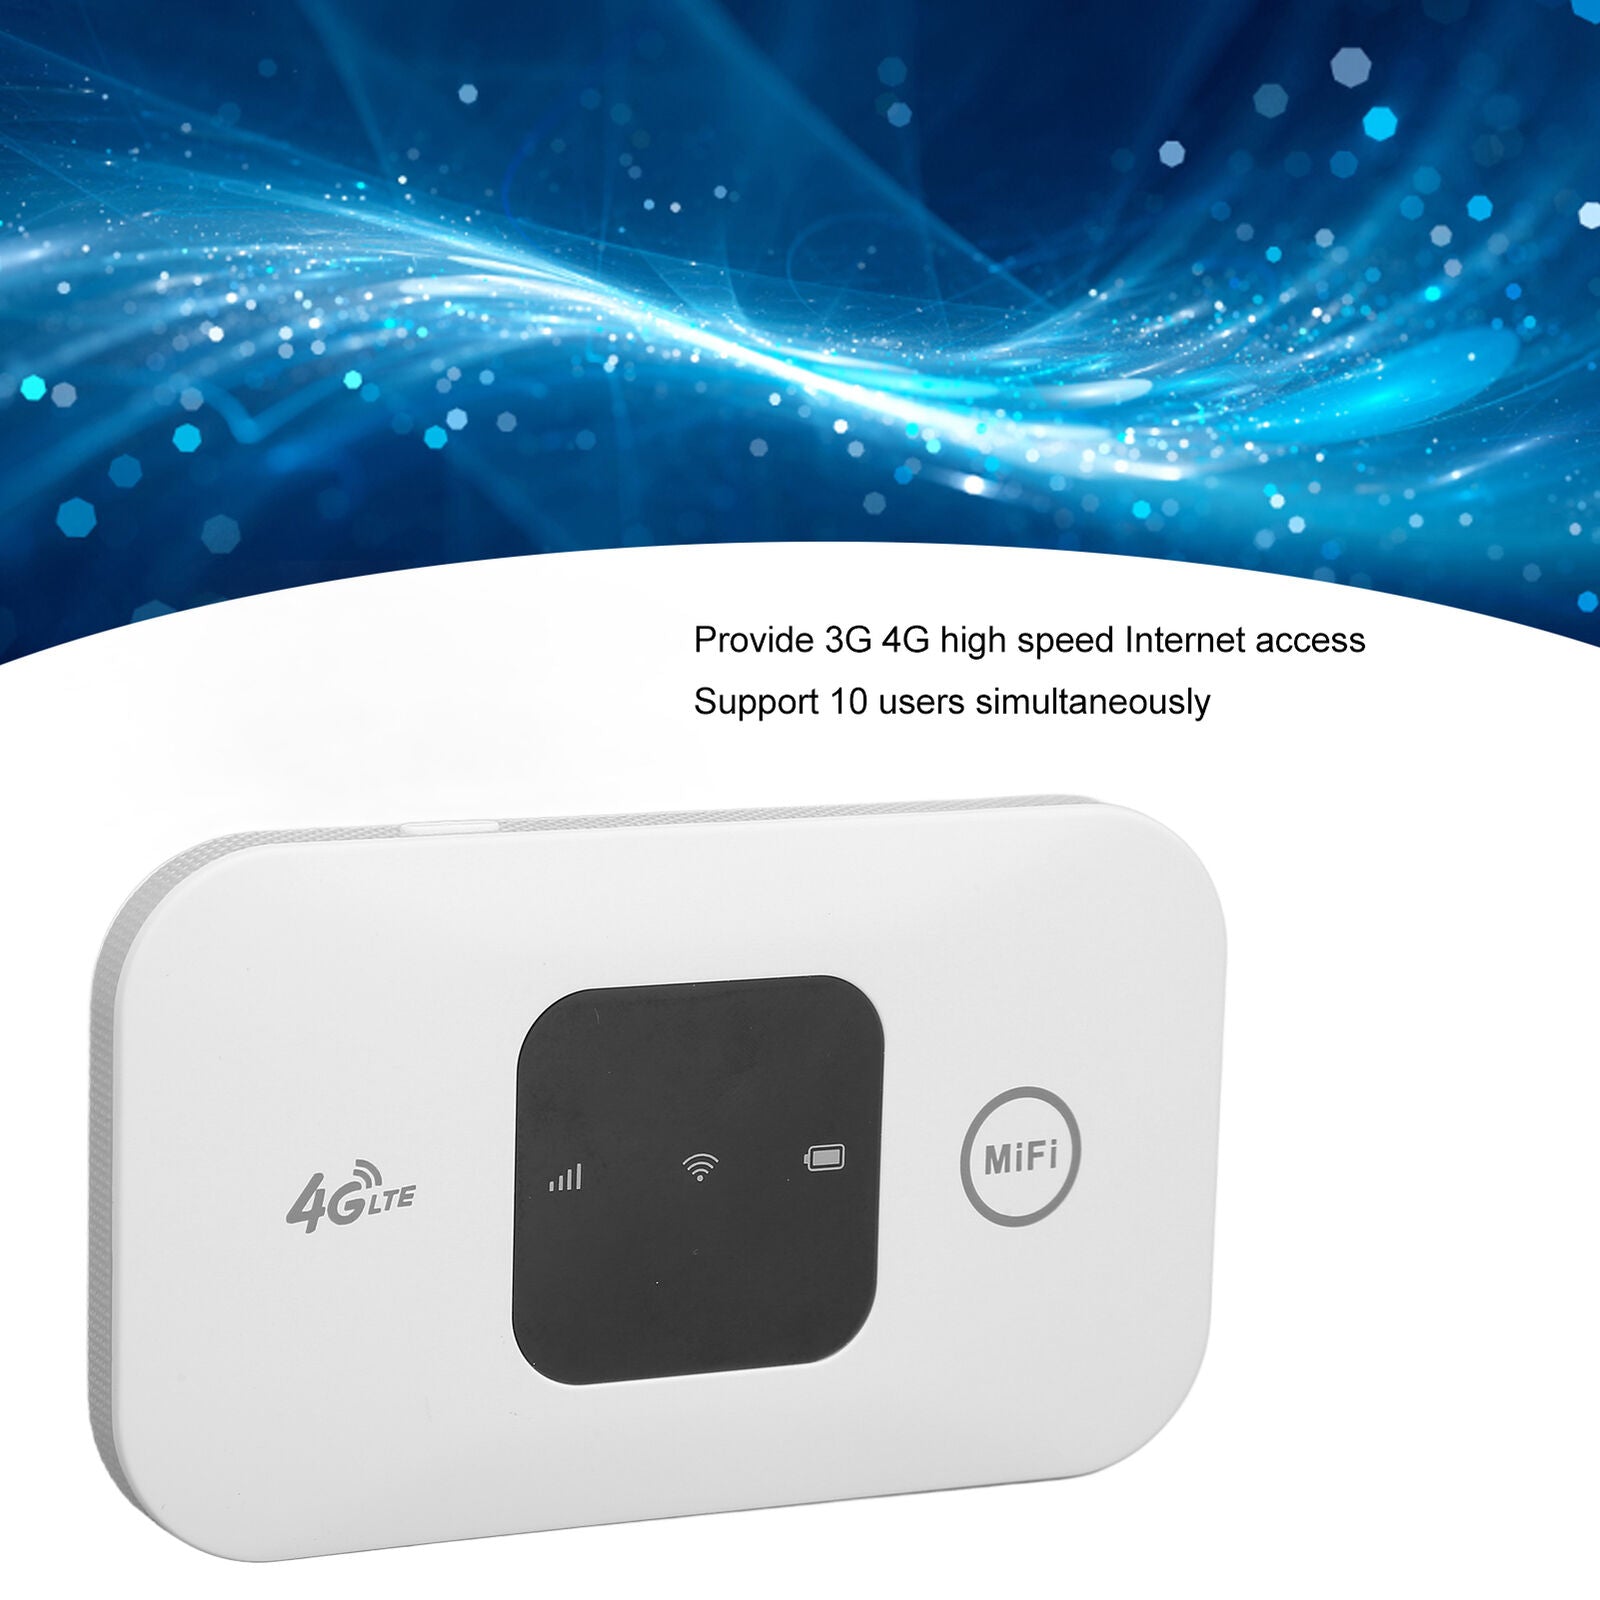 Portable 4G LTE WiFi Router 3G 4G Wireless Internet Router Mobile Hot Spot 10 Users